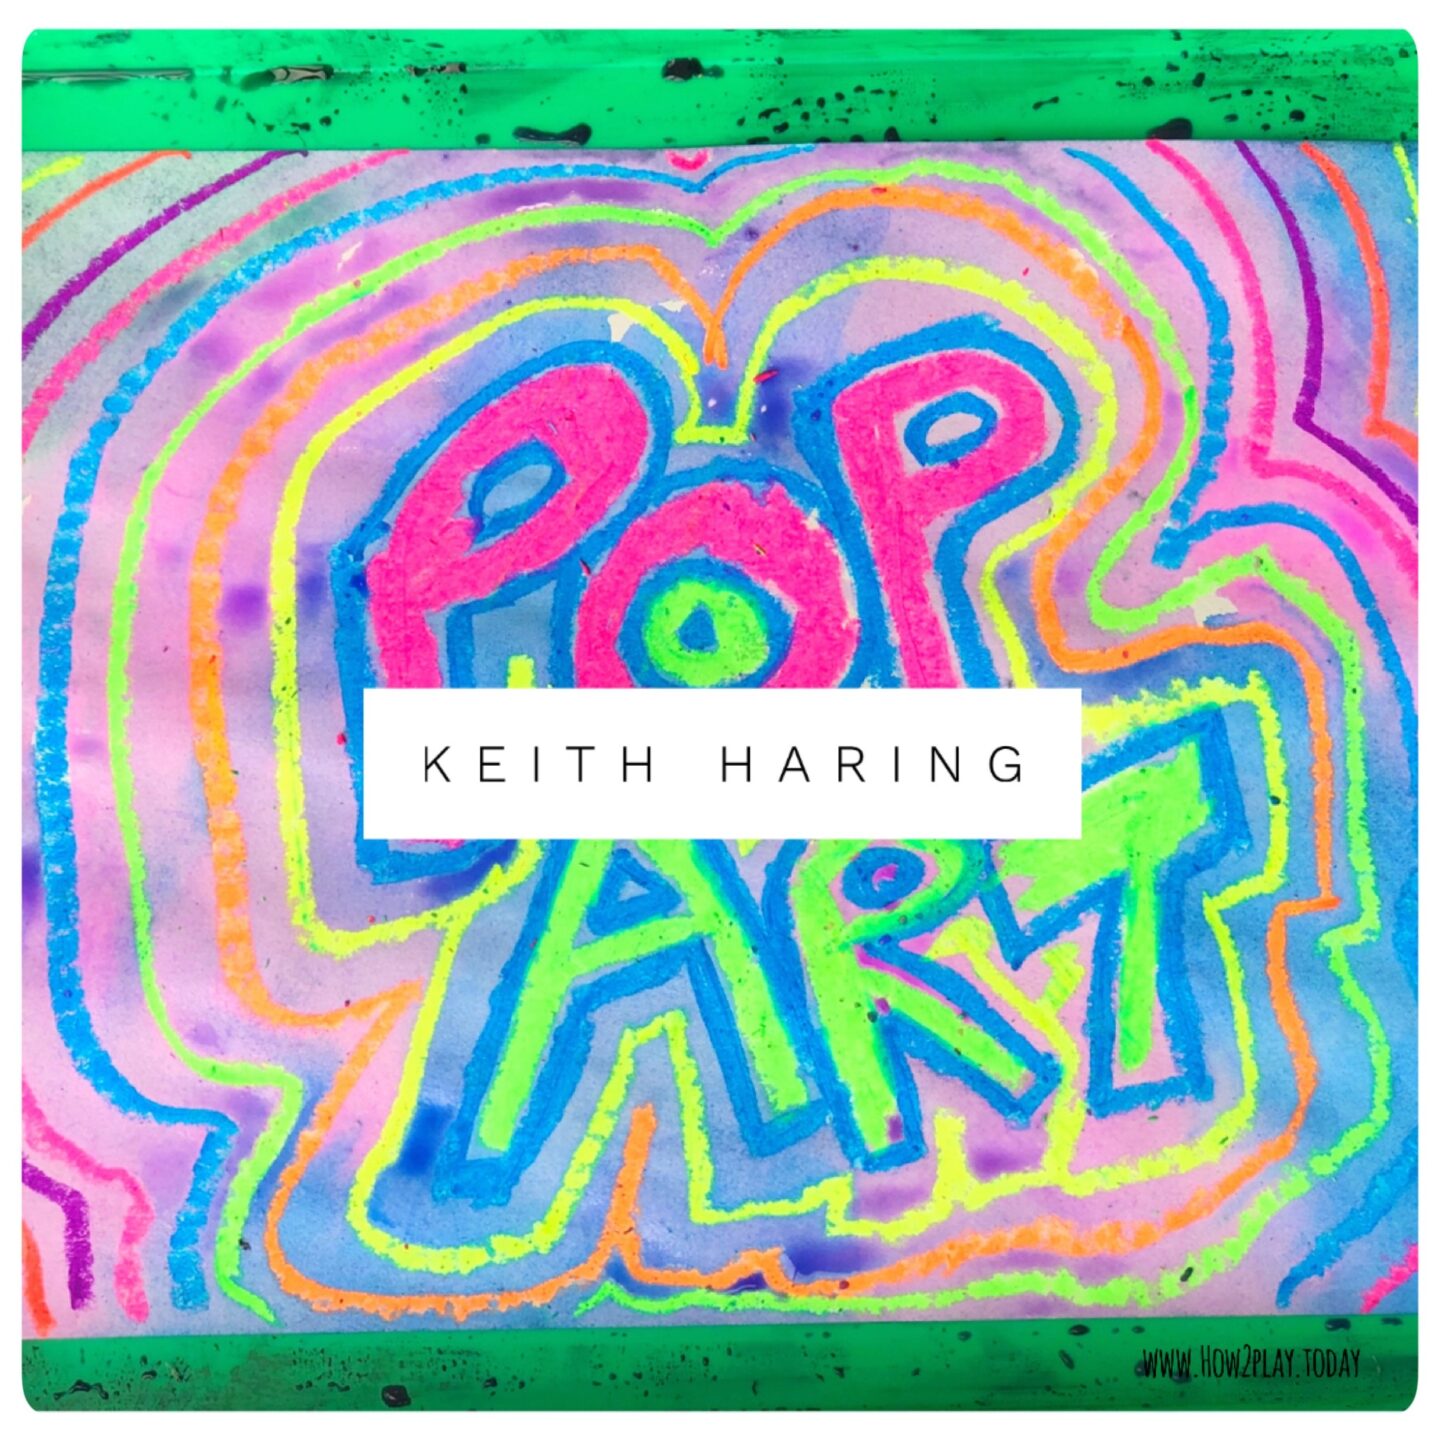 Keith Haring, a famous artist, is primarily known for solid, bold lines with vibrant colors.  His vibrant artwork tells of friendship, fun, and acceptance. Today we're creating interactive ways to think about Pop Art while learning about Keith Haring